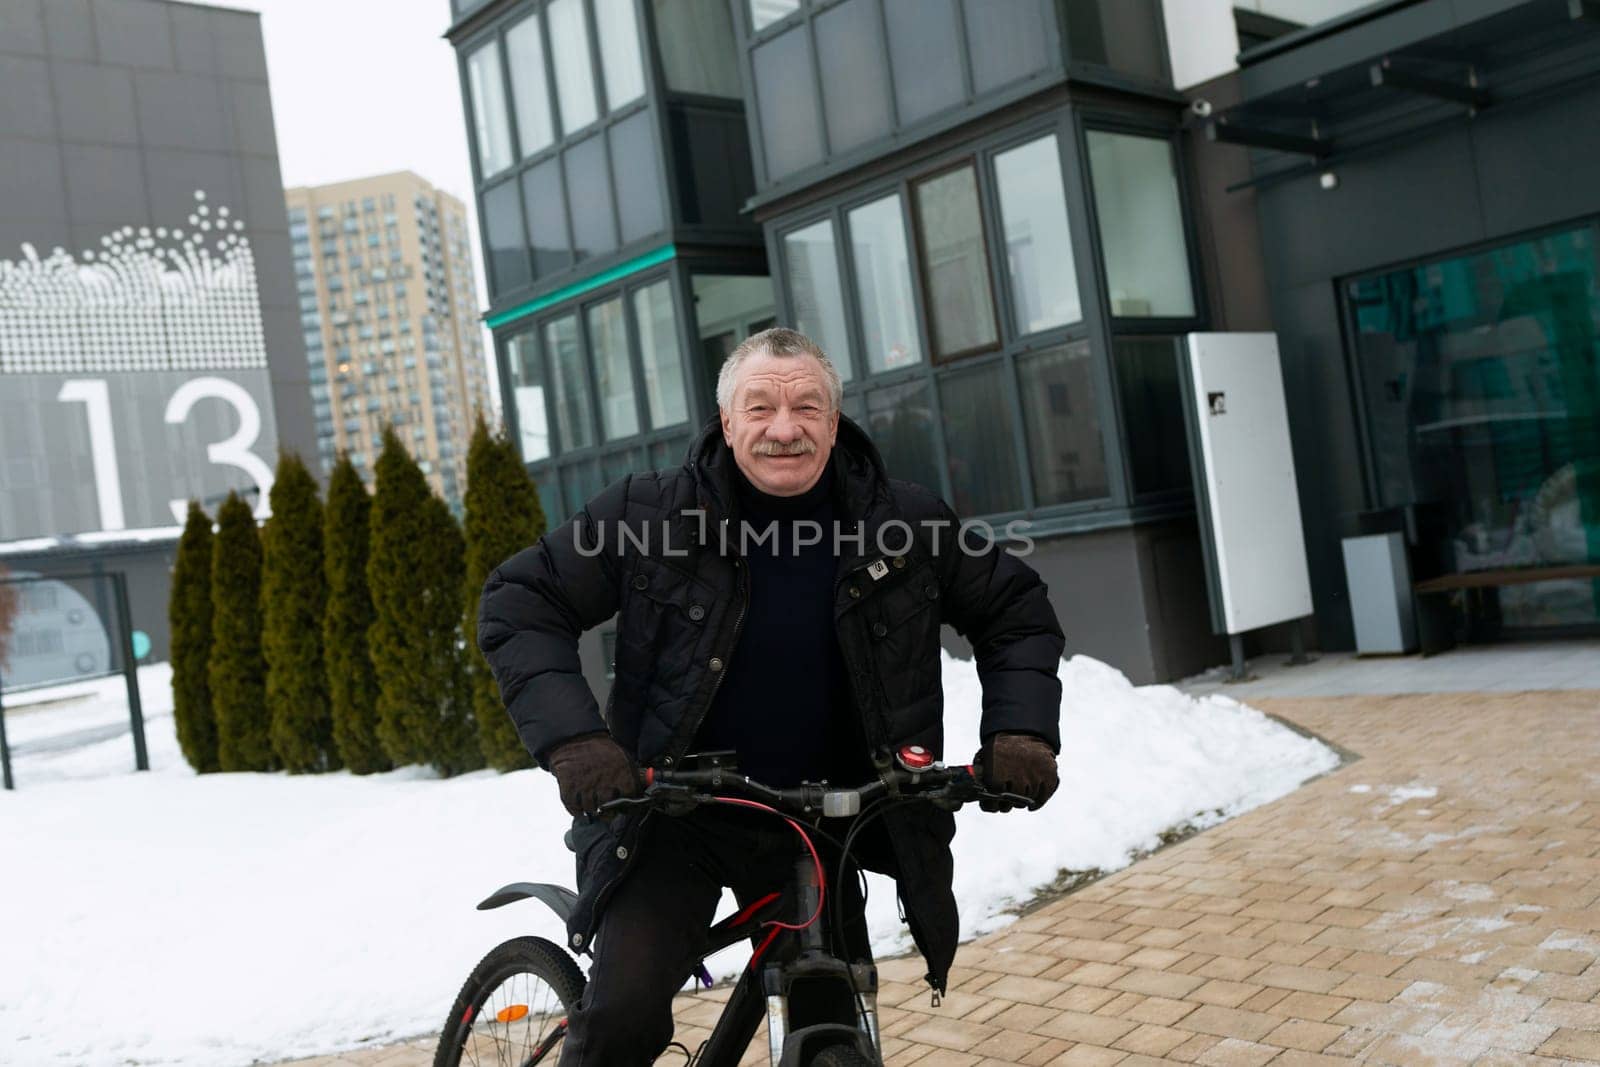 Senior man actively pedaling a bicycle on the street in winter.